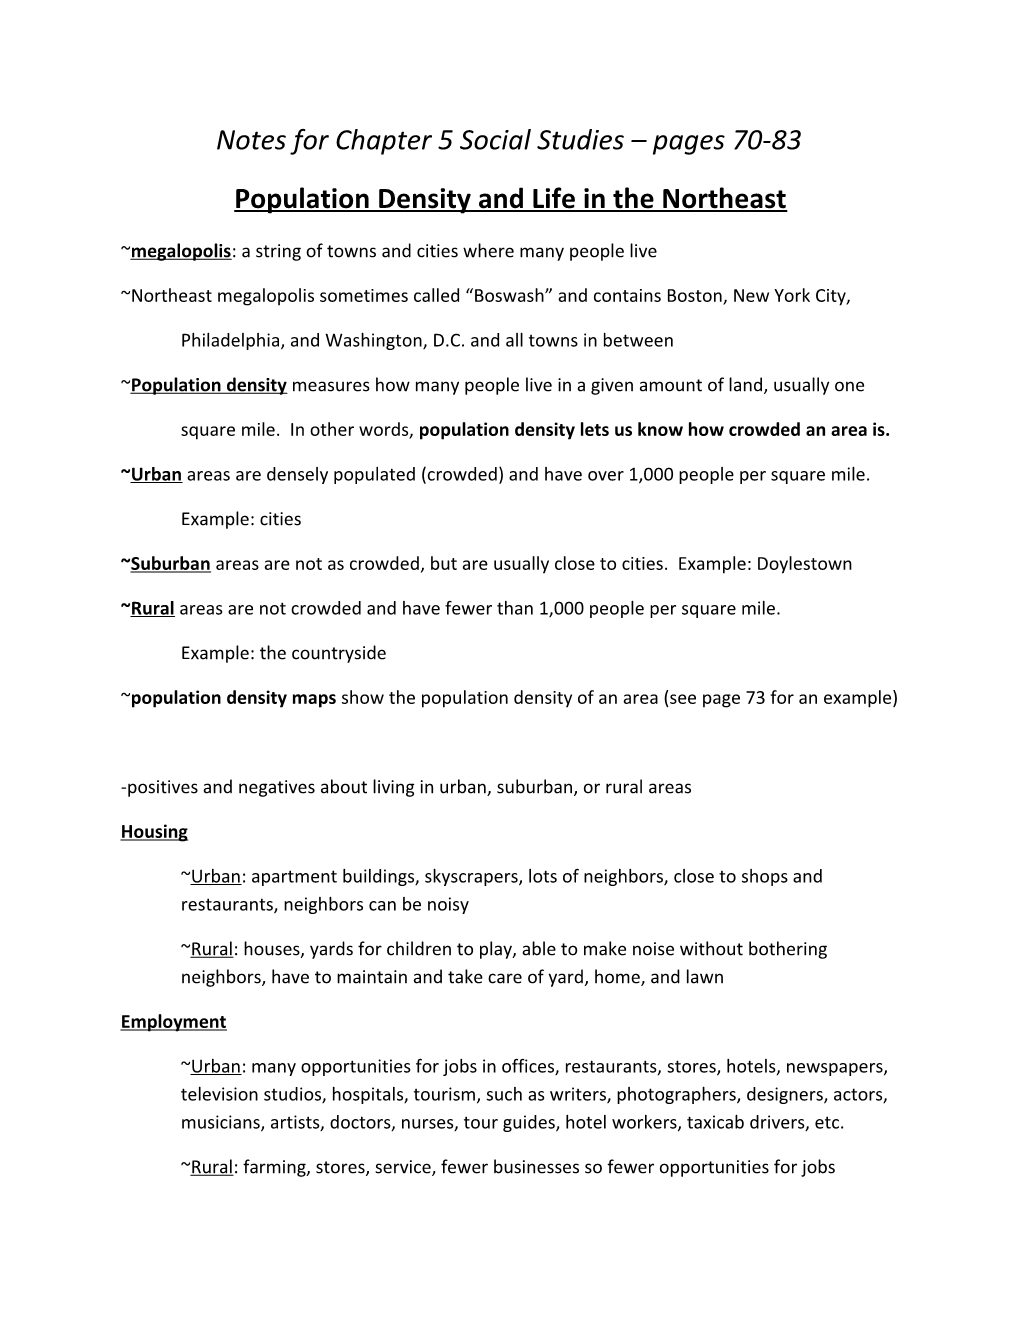 Population Density and Life in the Northeast